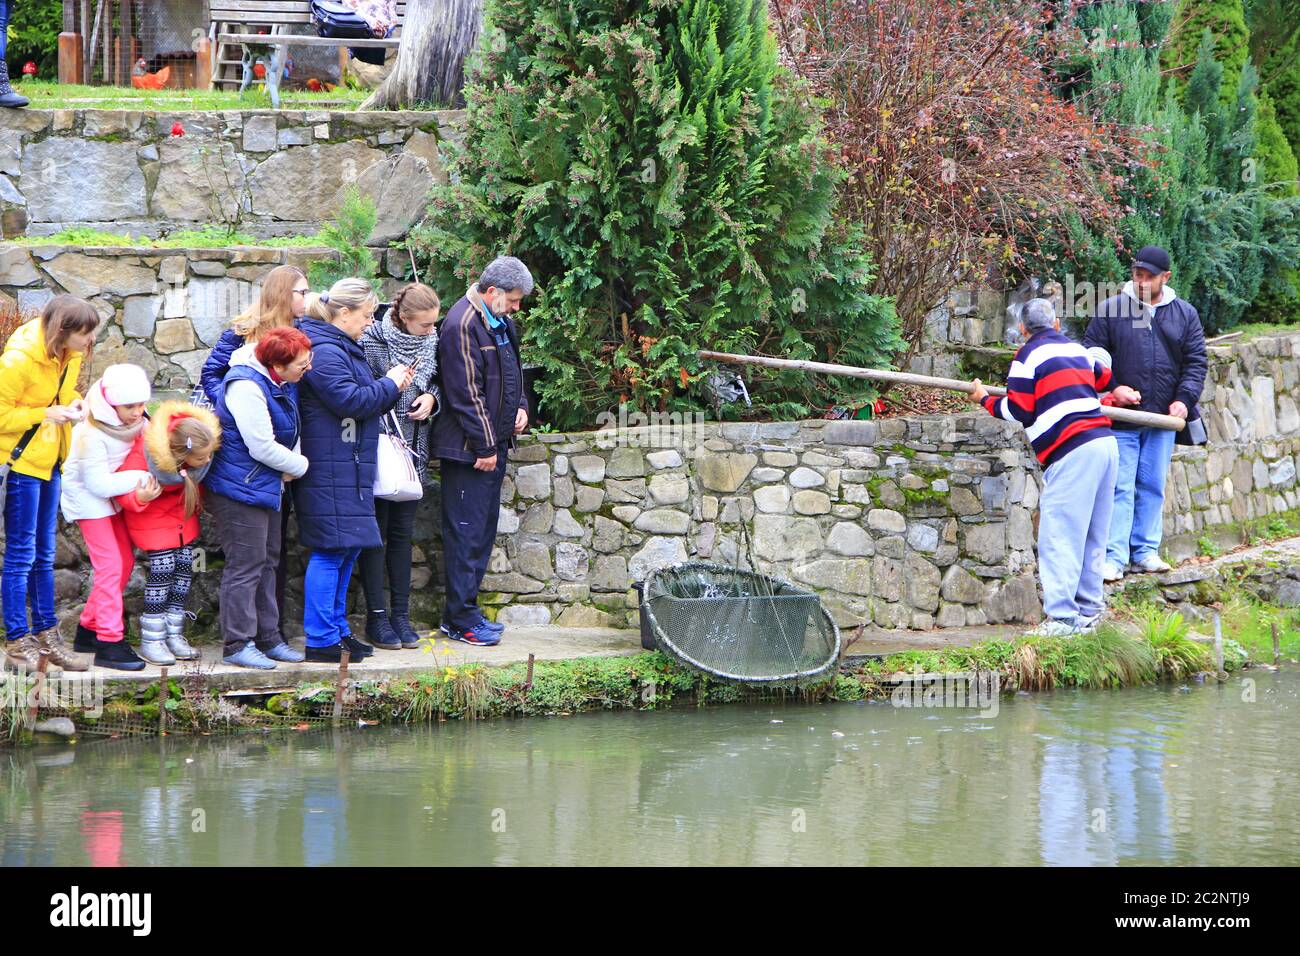 Man catching trout by nettle in pond. Fish farming. People watching man catching fish Stock Photo